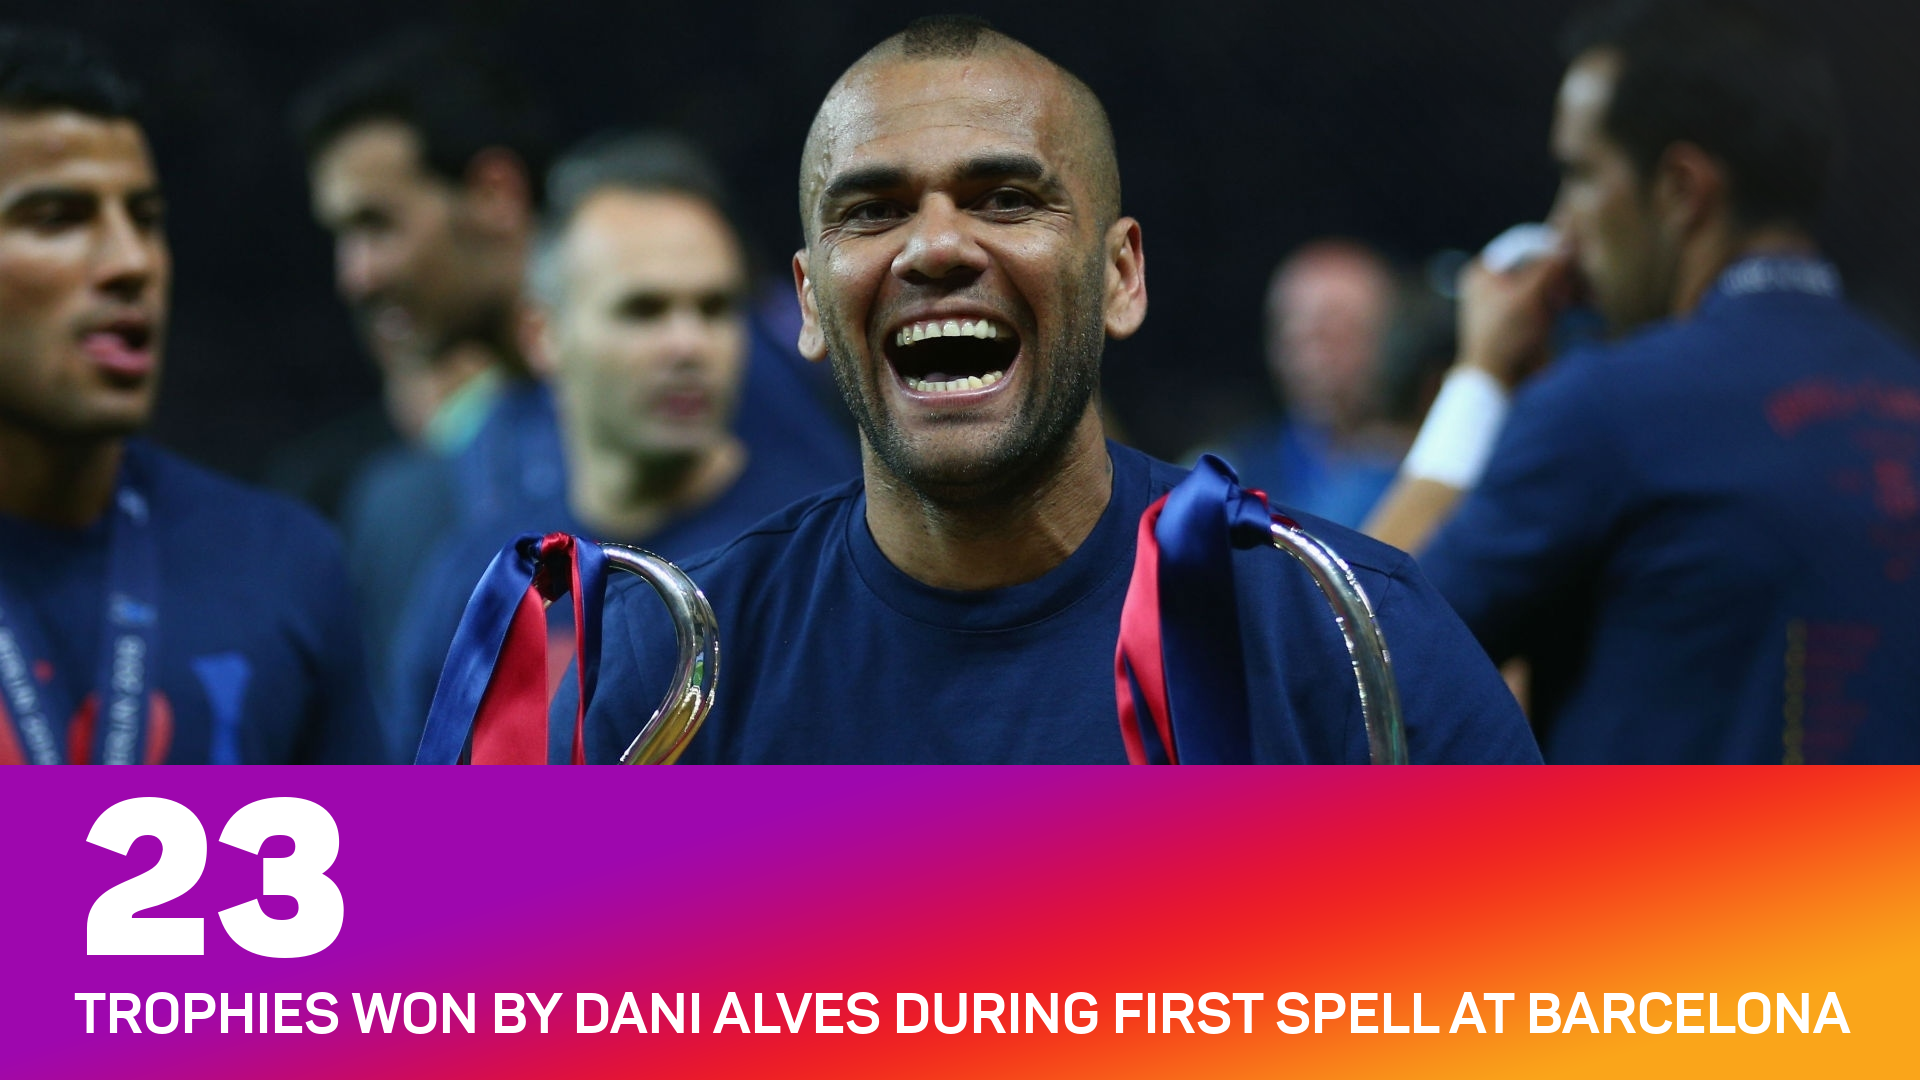 Dani Alves won 23 trophies during his first spell with Barcelona